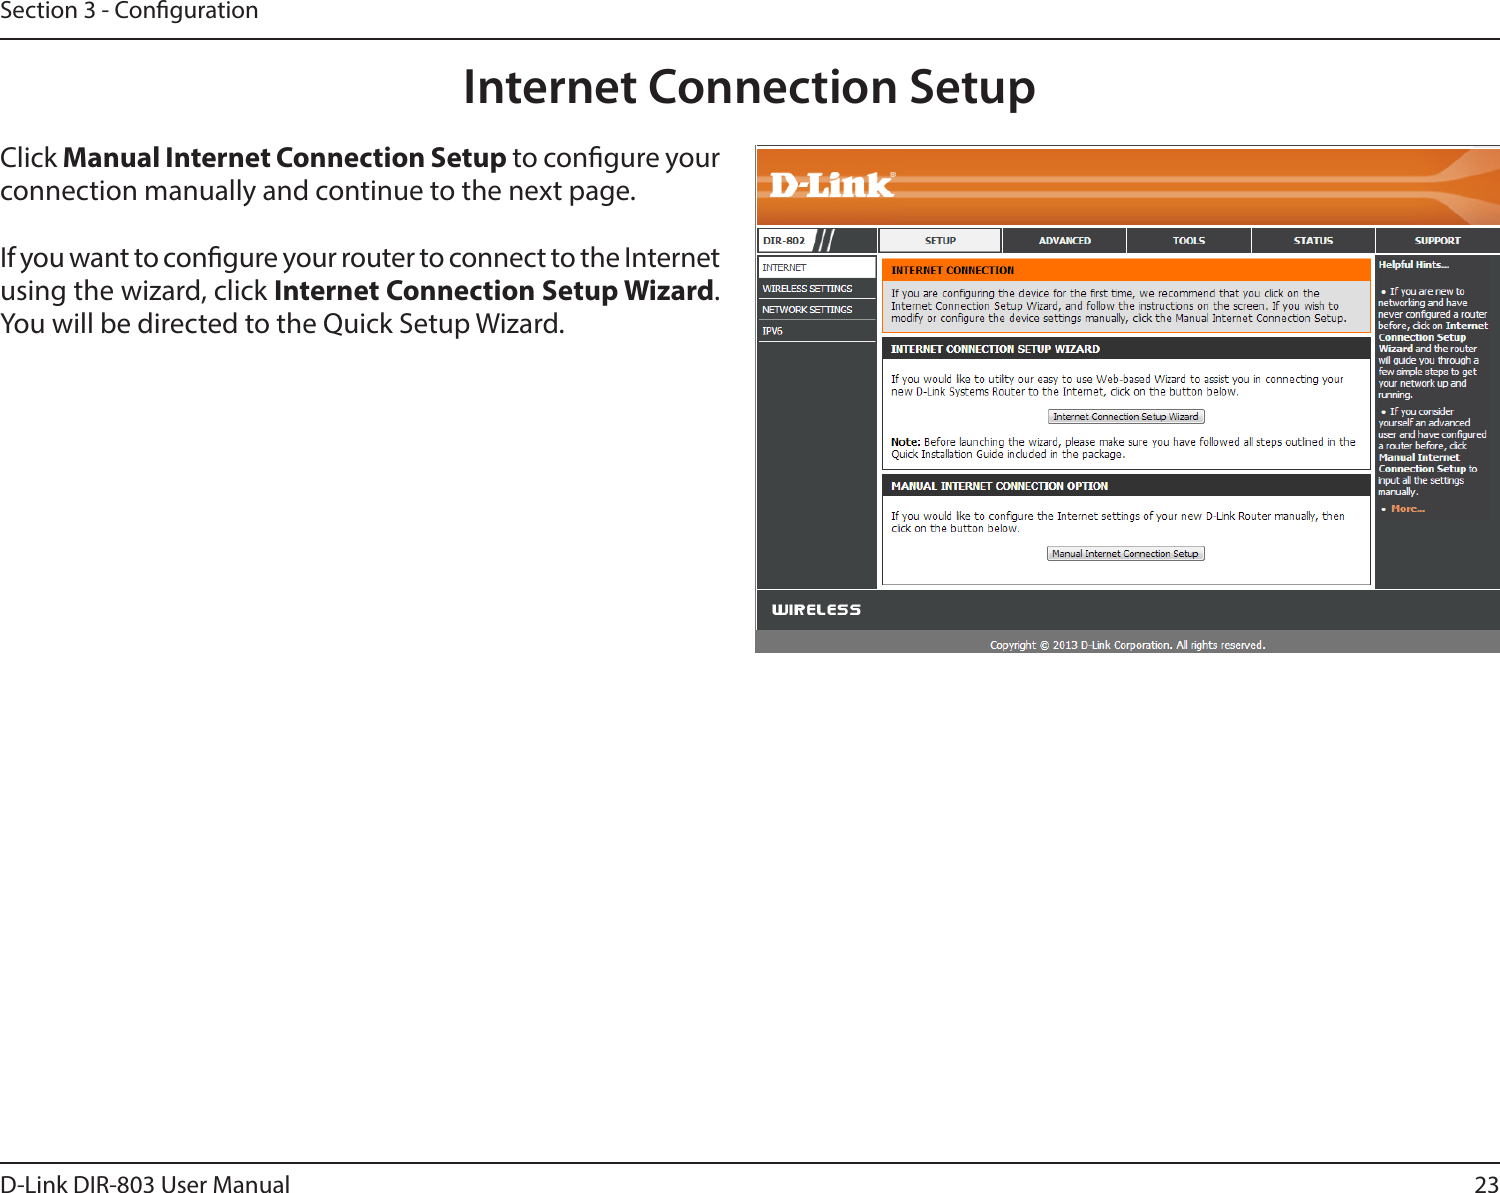 23D-Link DIR-803 User ManualSection 3 - CongurationInternet Connection SetupClick Manual Internet Connection Setup to congure your connection manually and continue to the next page.If you want to congure your router to connect to the Internet using the wizard, click Internet Connection Setup Wizard. You will be directed to the Quick Setup Wizard. 